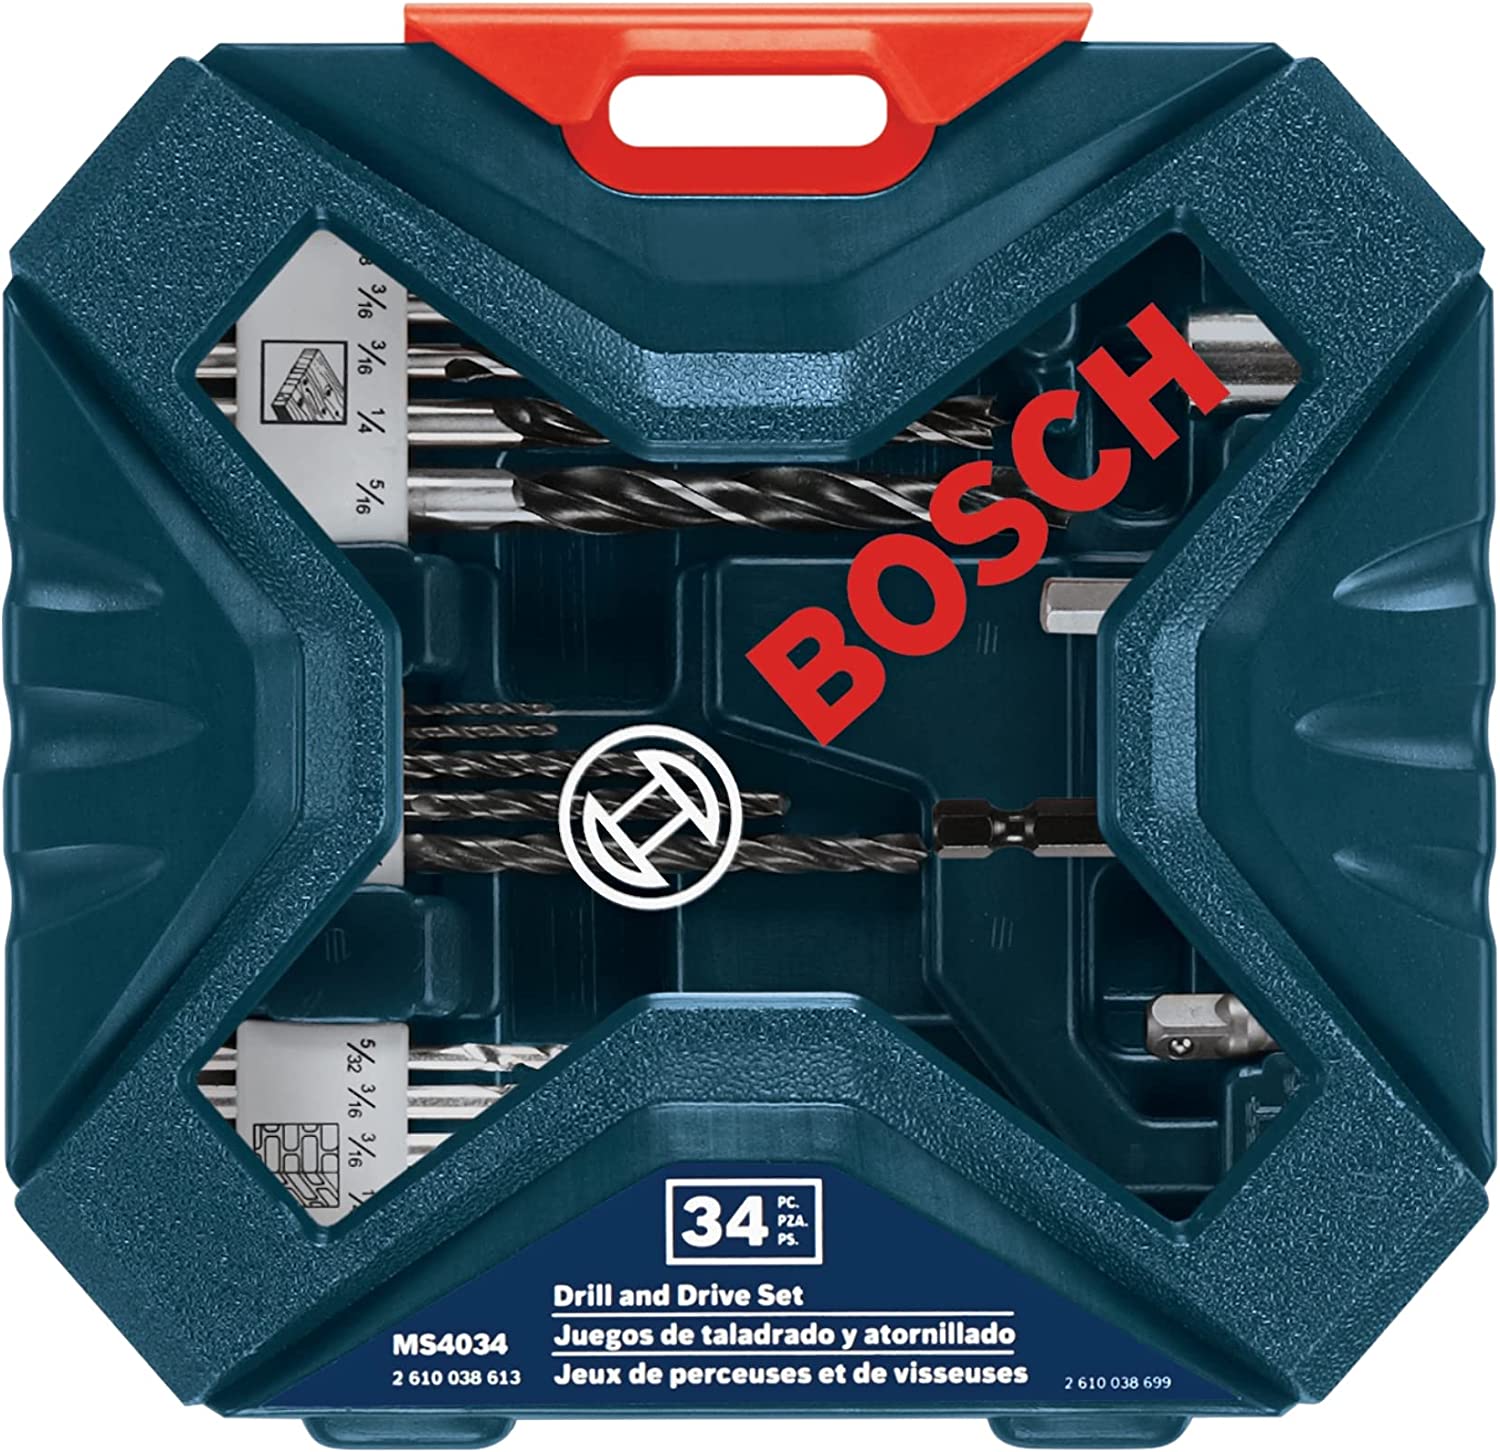 BOSCH MS4034 Drilling and Driving Set (34-Piece) , Black